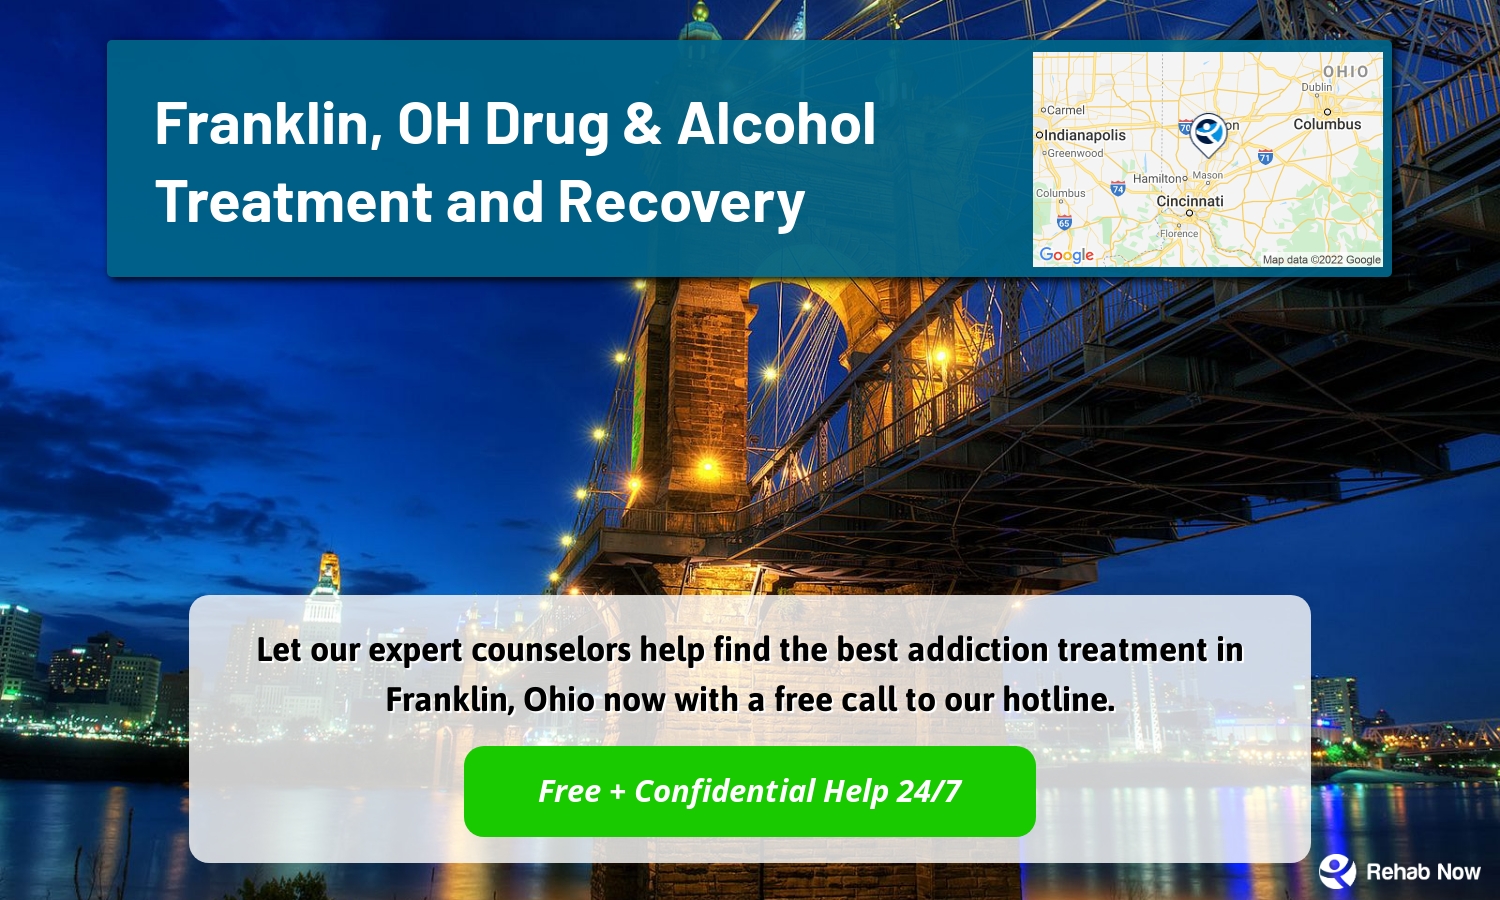 Let our expert counselors help find the best addiction treatment in Franklin, Ohio now with a free call to our hotline.